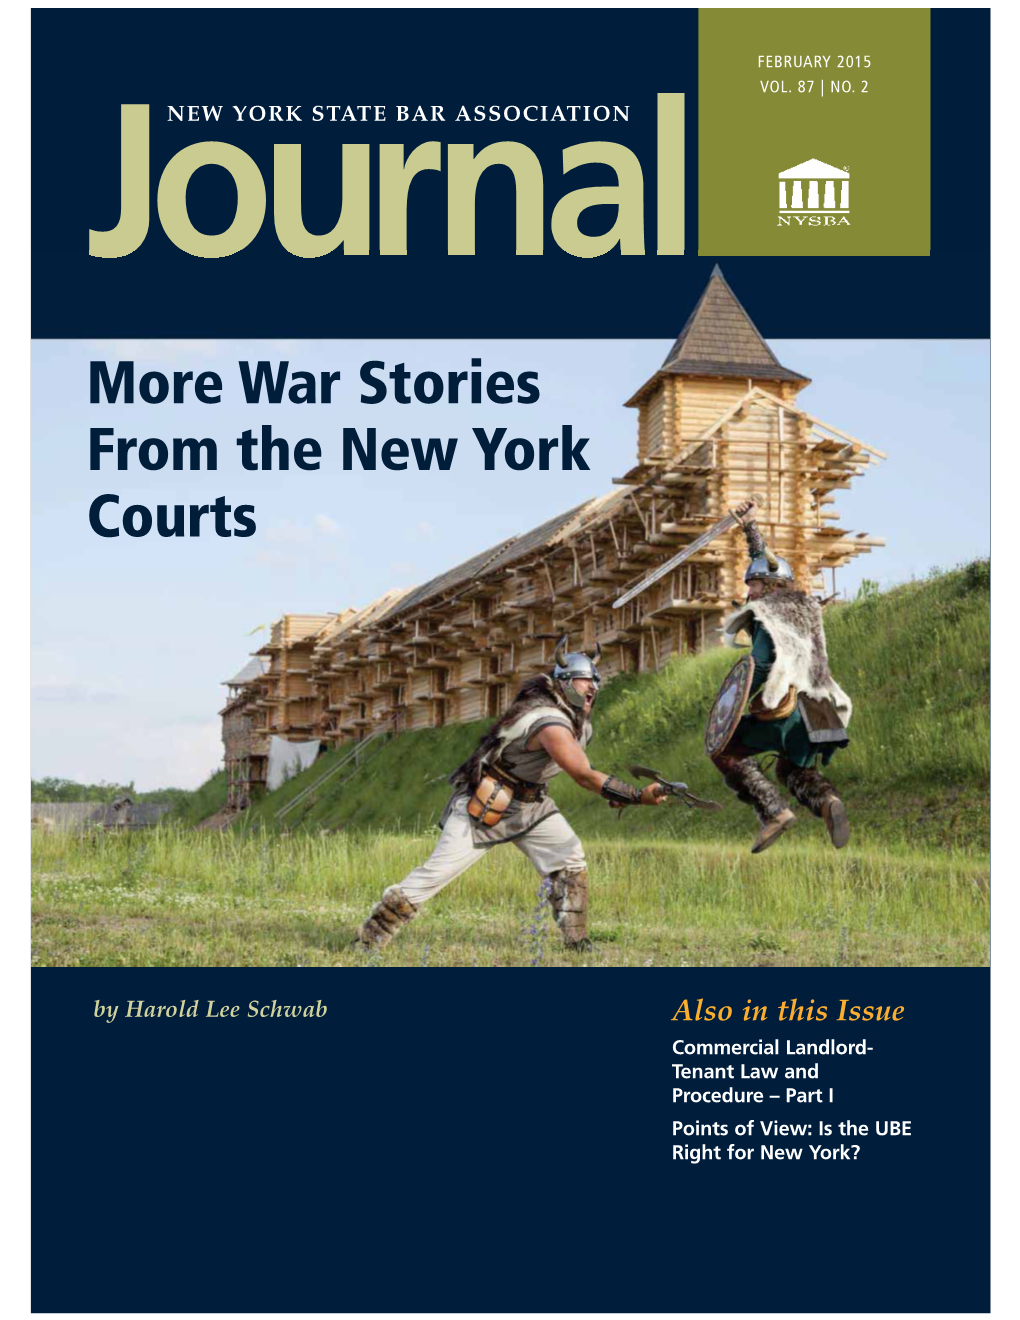 War Stories from the New York Courts